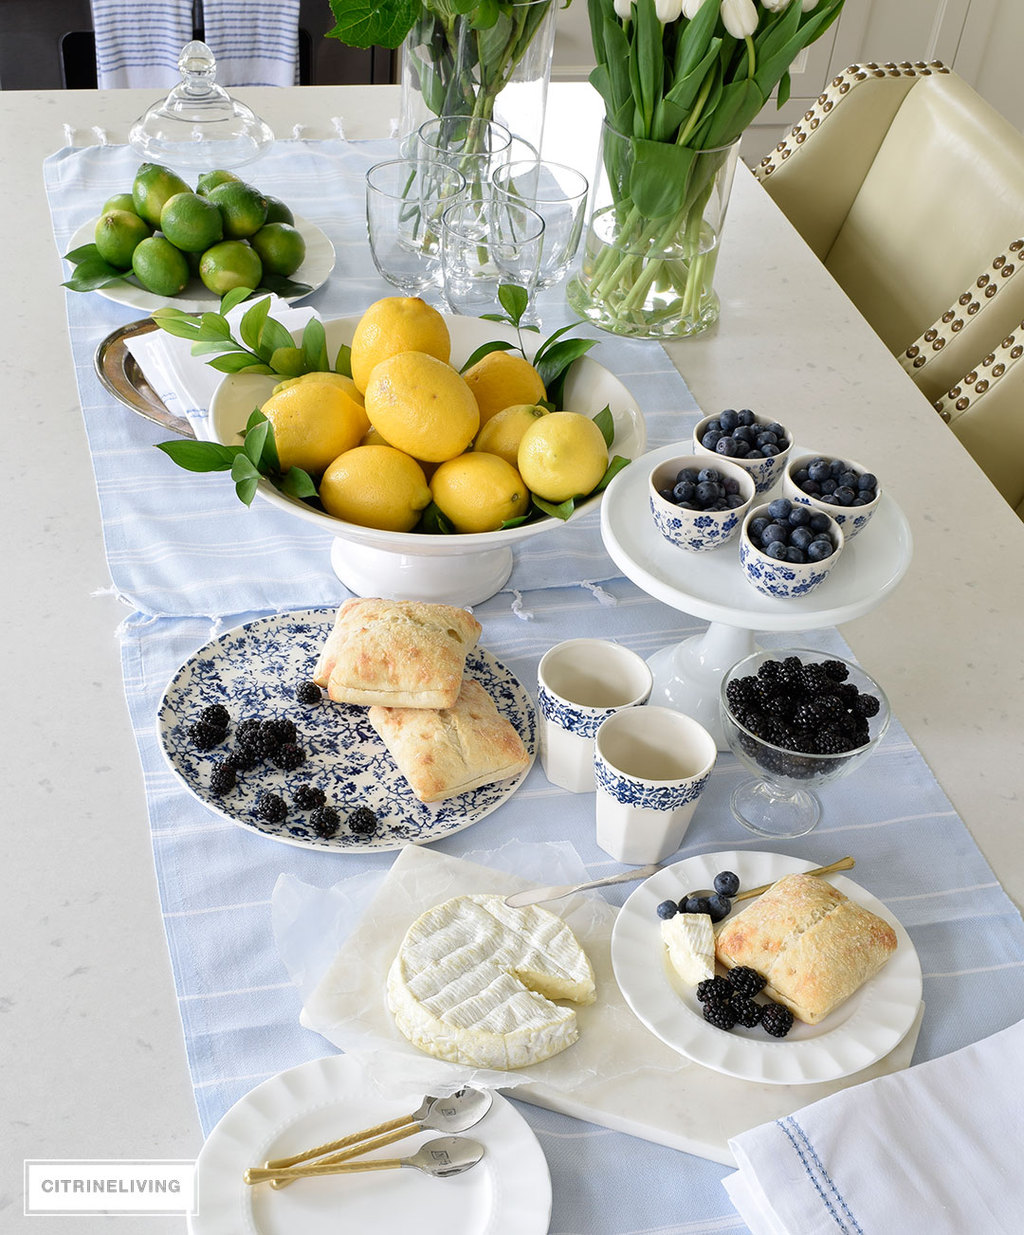 Create a welcoming tablescape of blue and white accented with fresh flowers, lemons and limes.